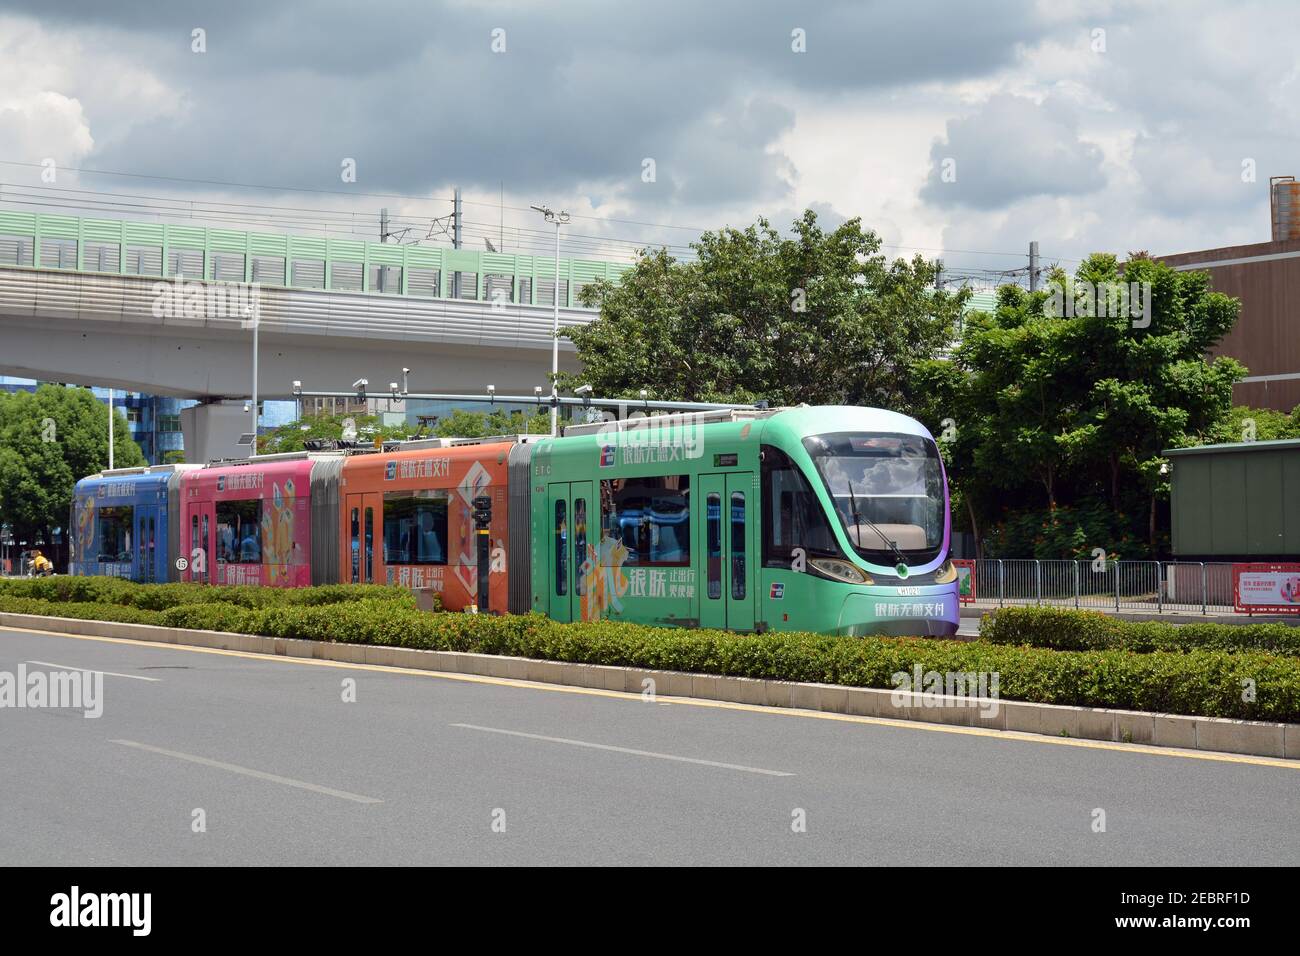 Tram at Qinghu Shenzhen, runs from the metro station at the end of line 4. Stock Photo